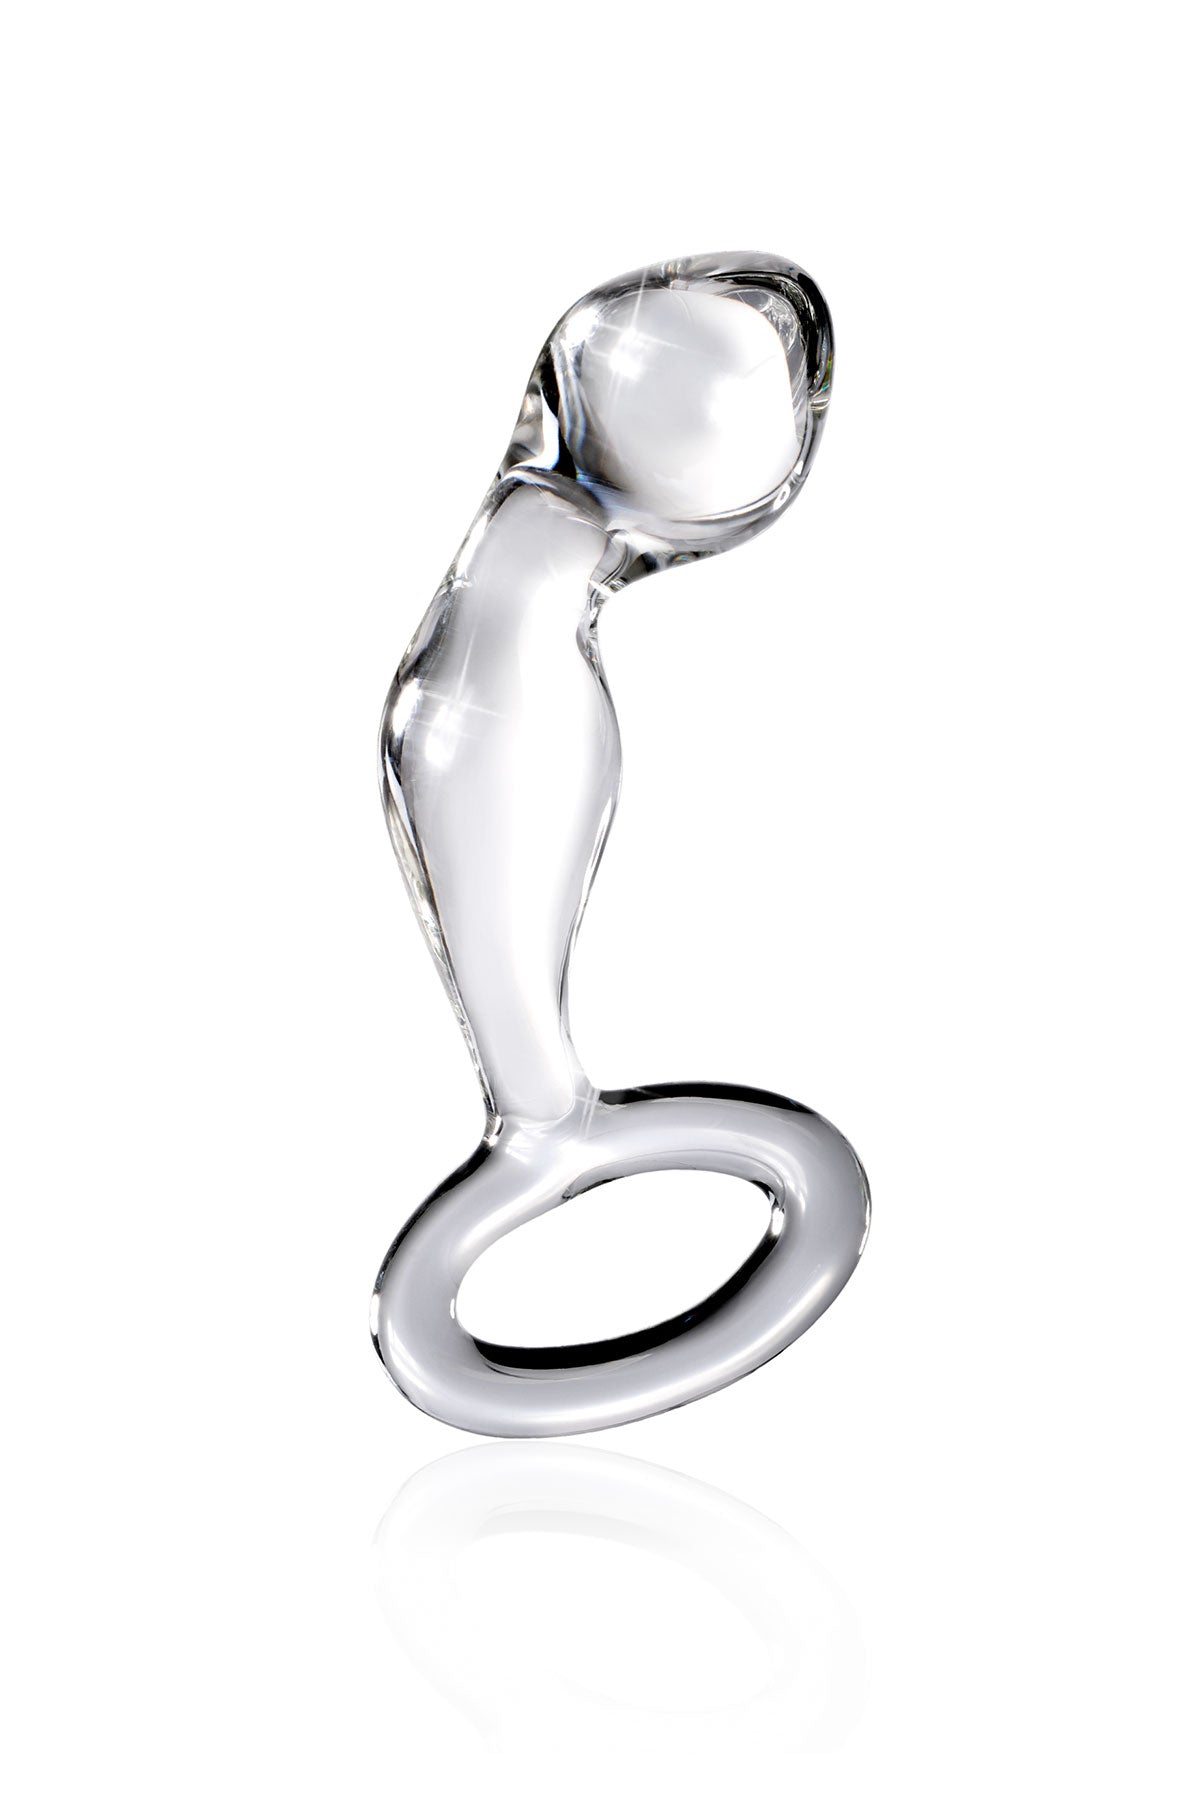 The Drill Sergeant | Glass Prostate Massager